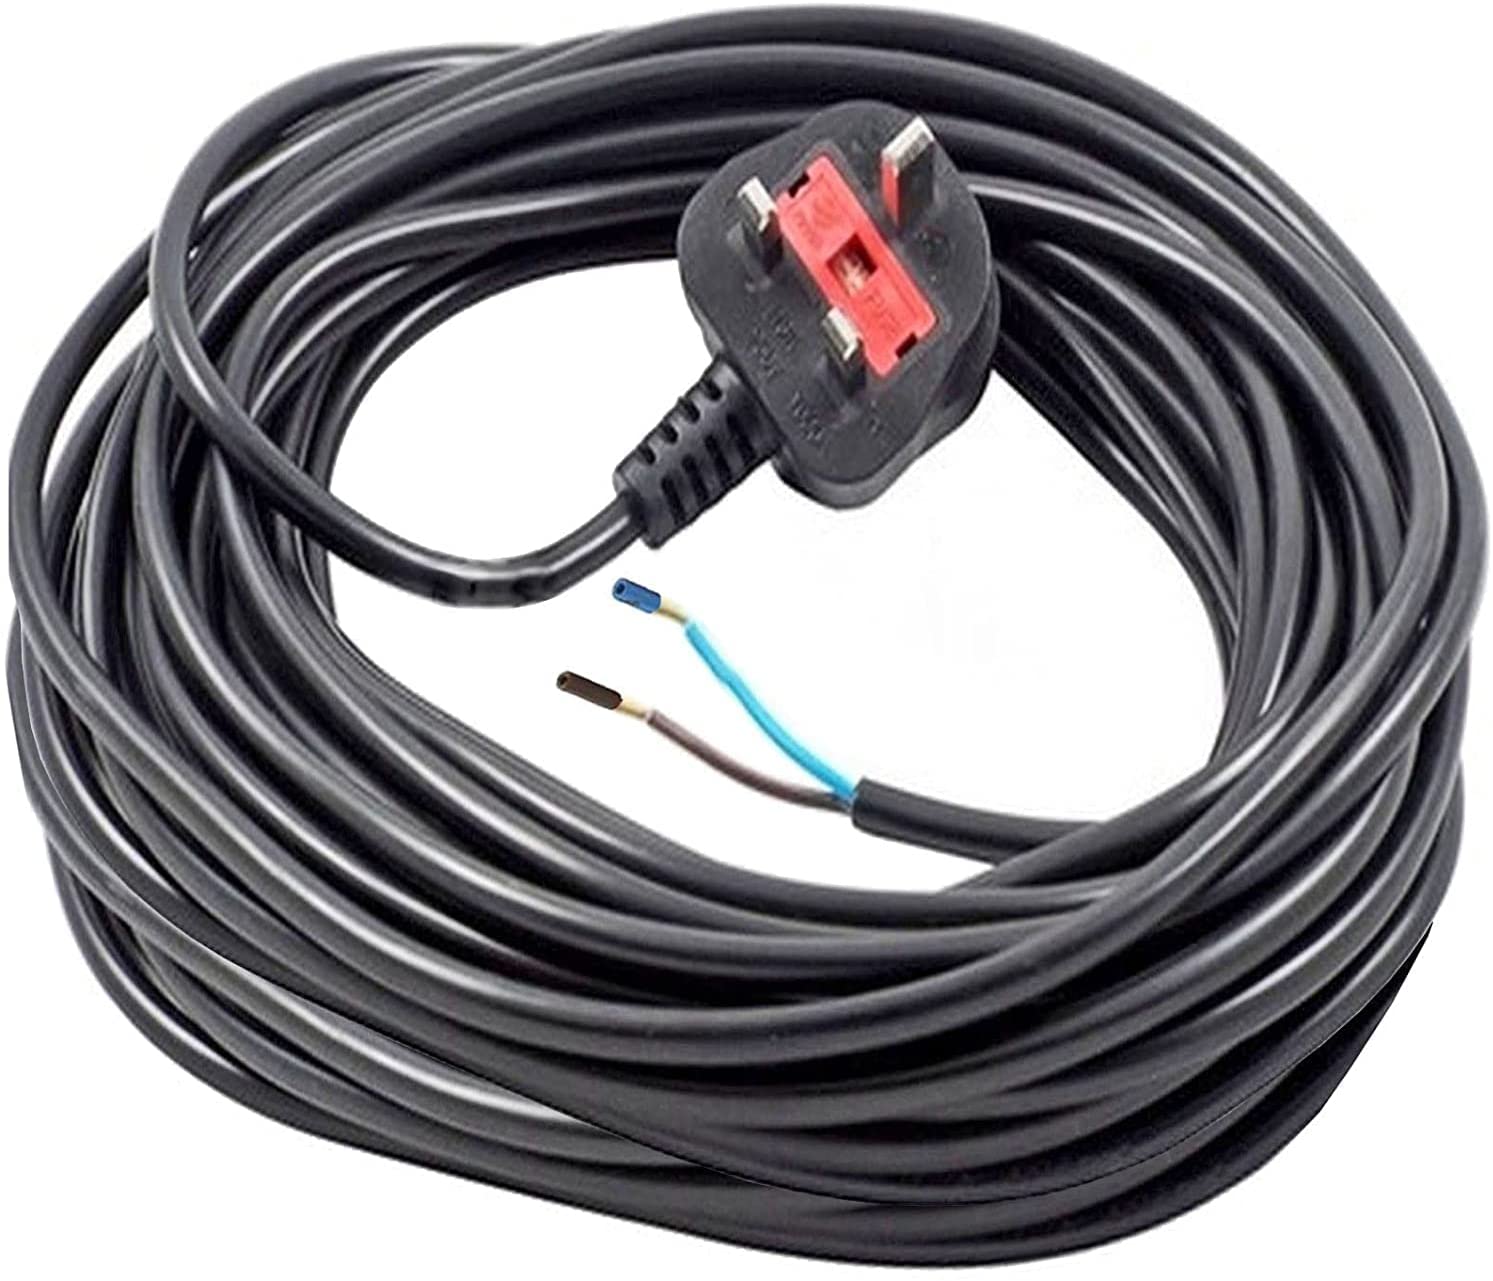 XL Extra Long 12M Metre Black Cable Mains Power Lead for Shark Vacuum Cleaner (UK Plug)